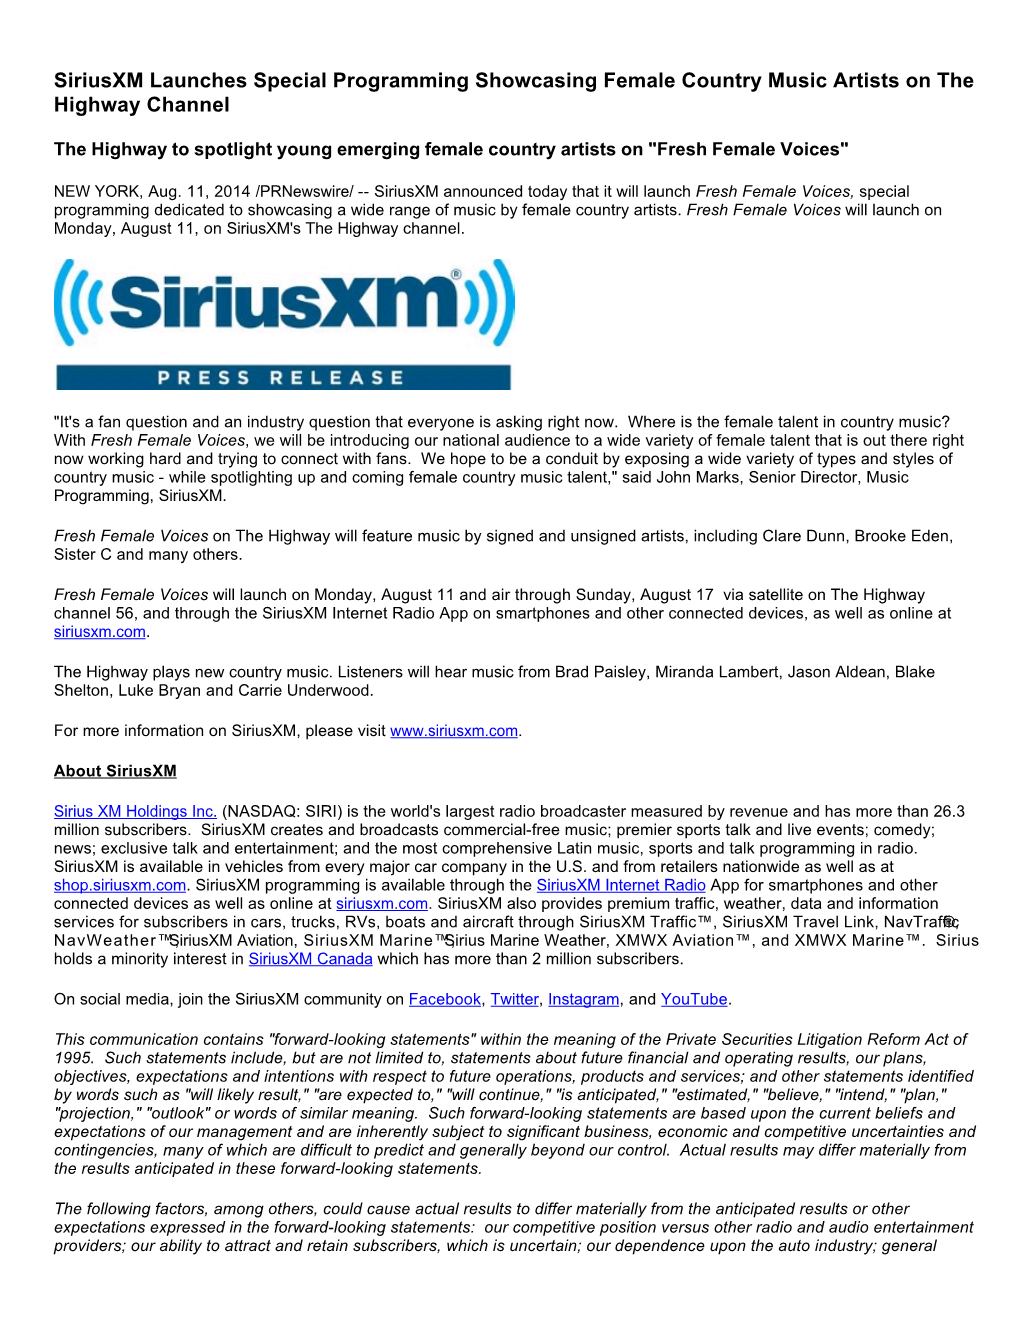 Siriusxm Launches Special Programming Showcasing Female Country Music Artists on the Highway Channel